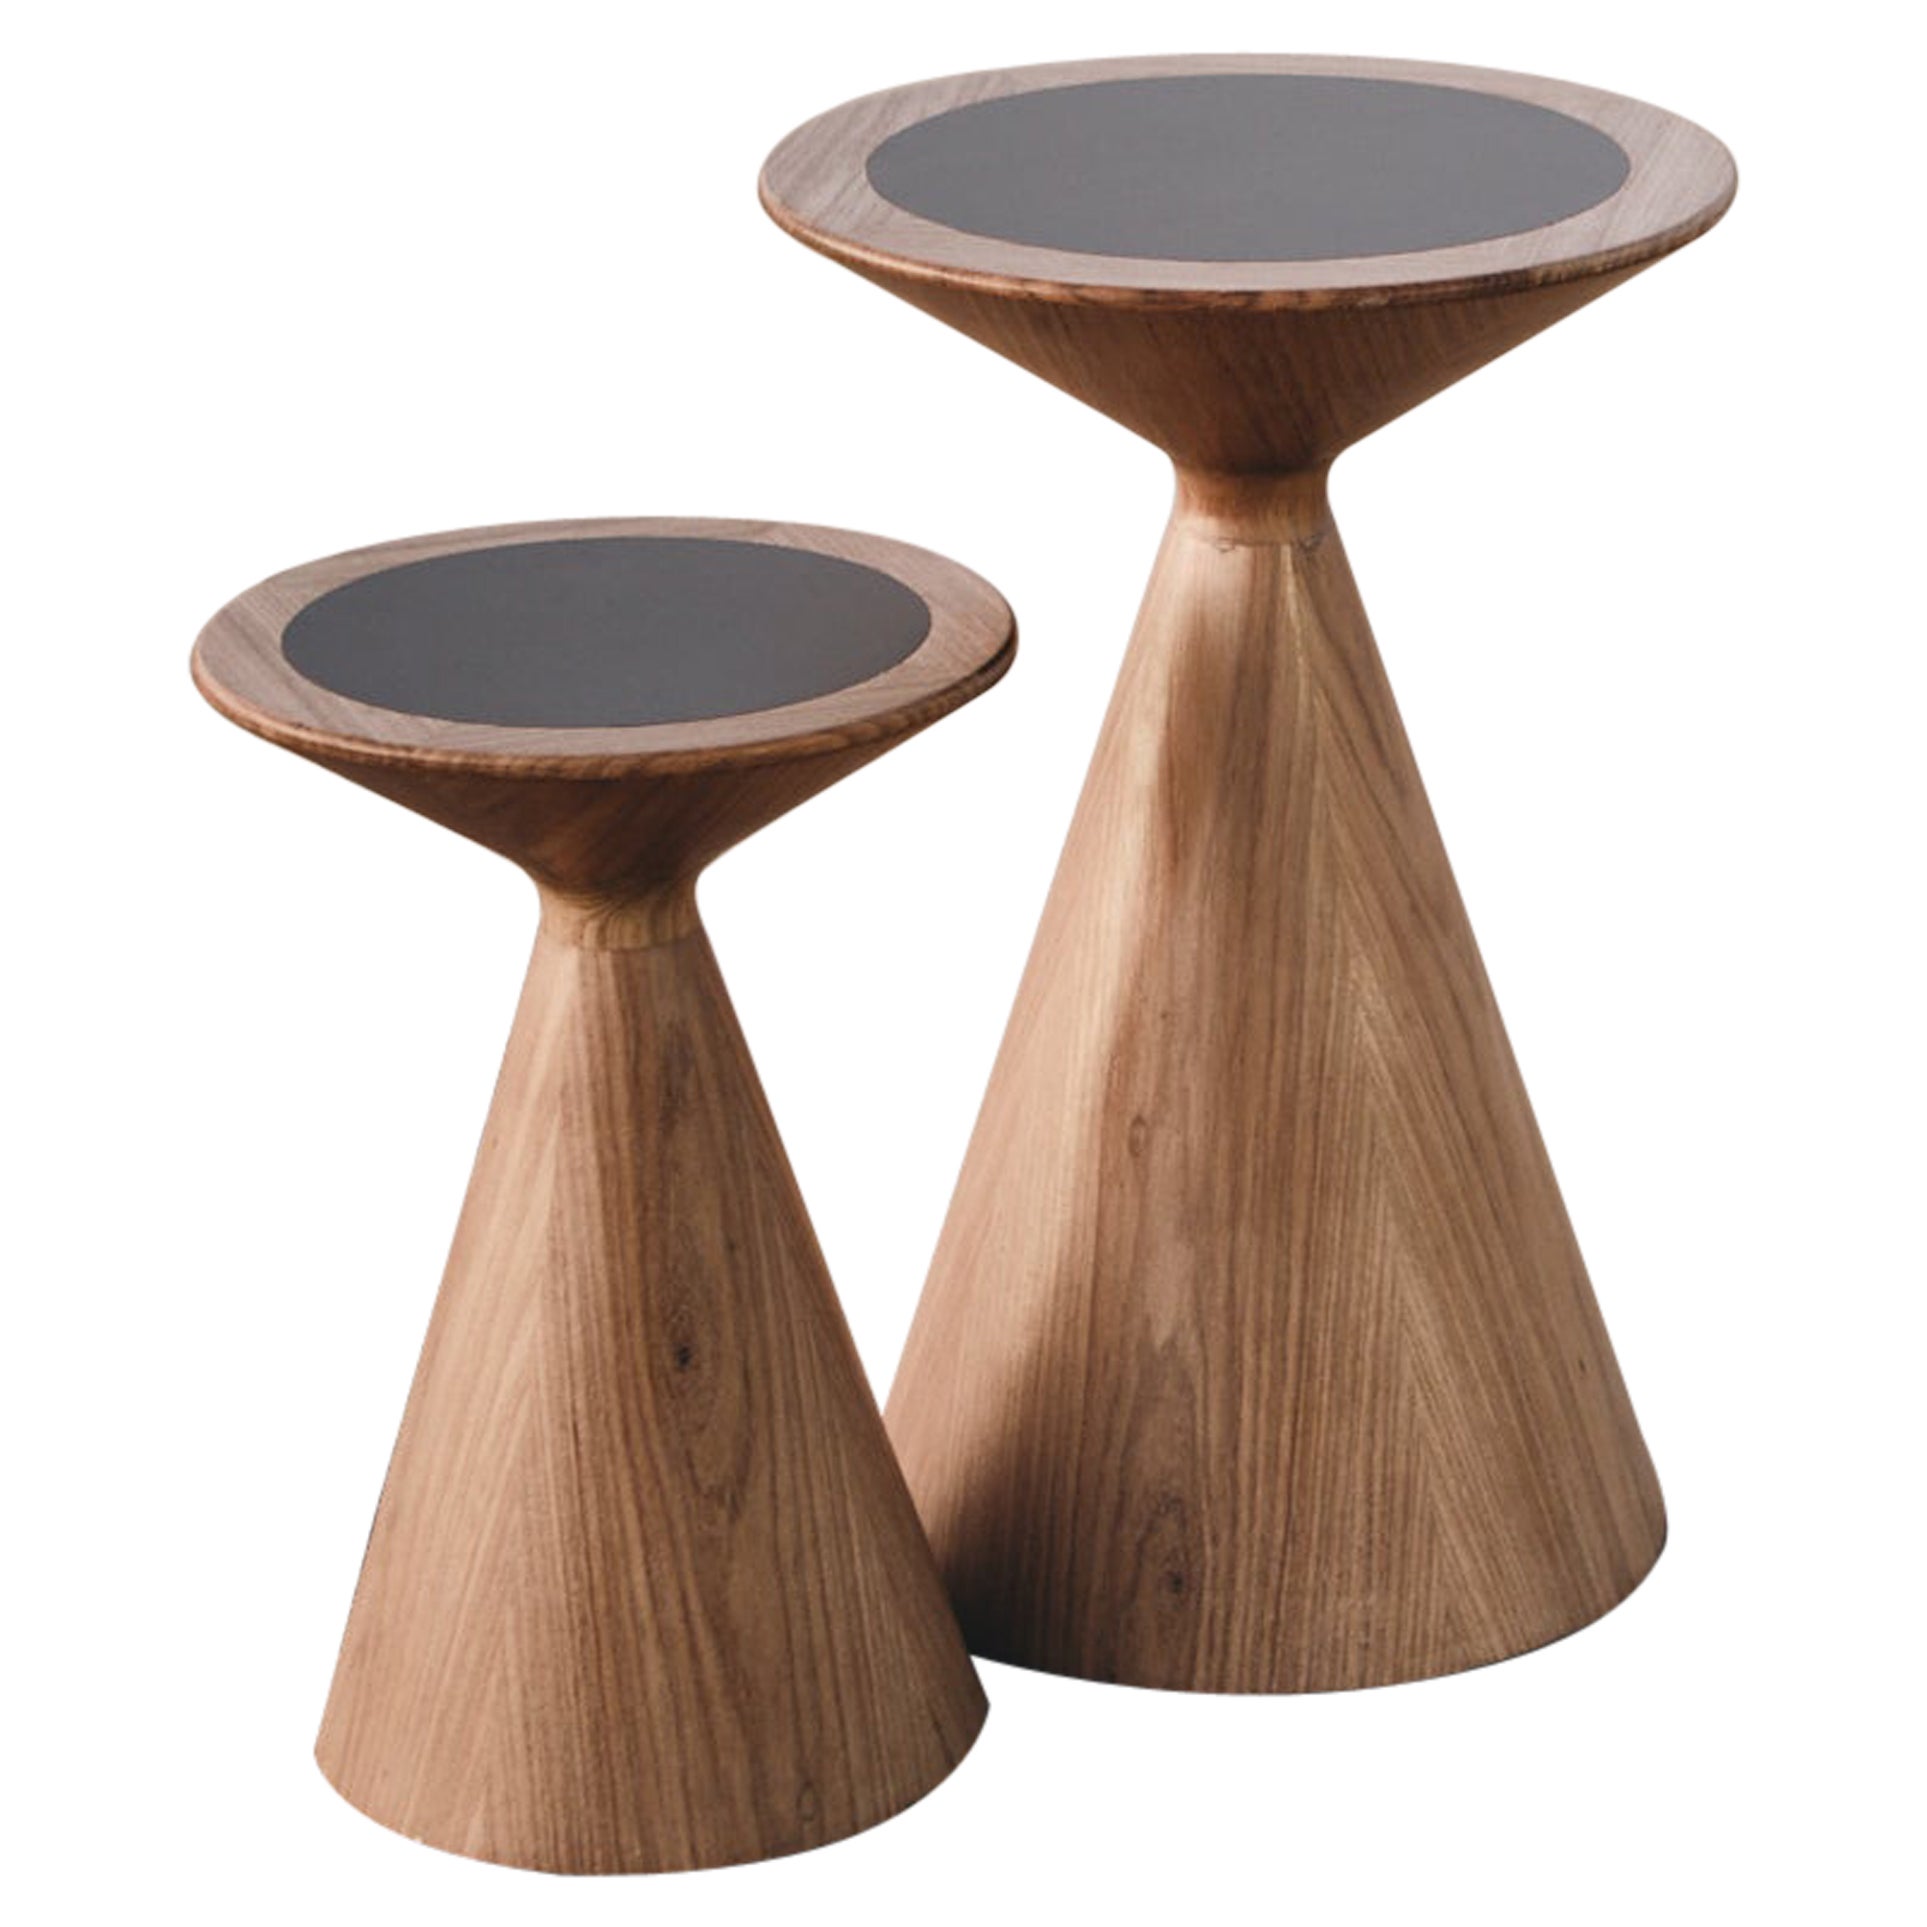 Carioca Small Sidetable and Stool in Freijo Wood